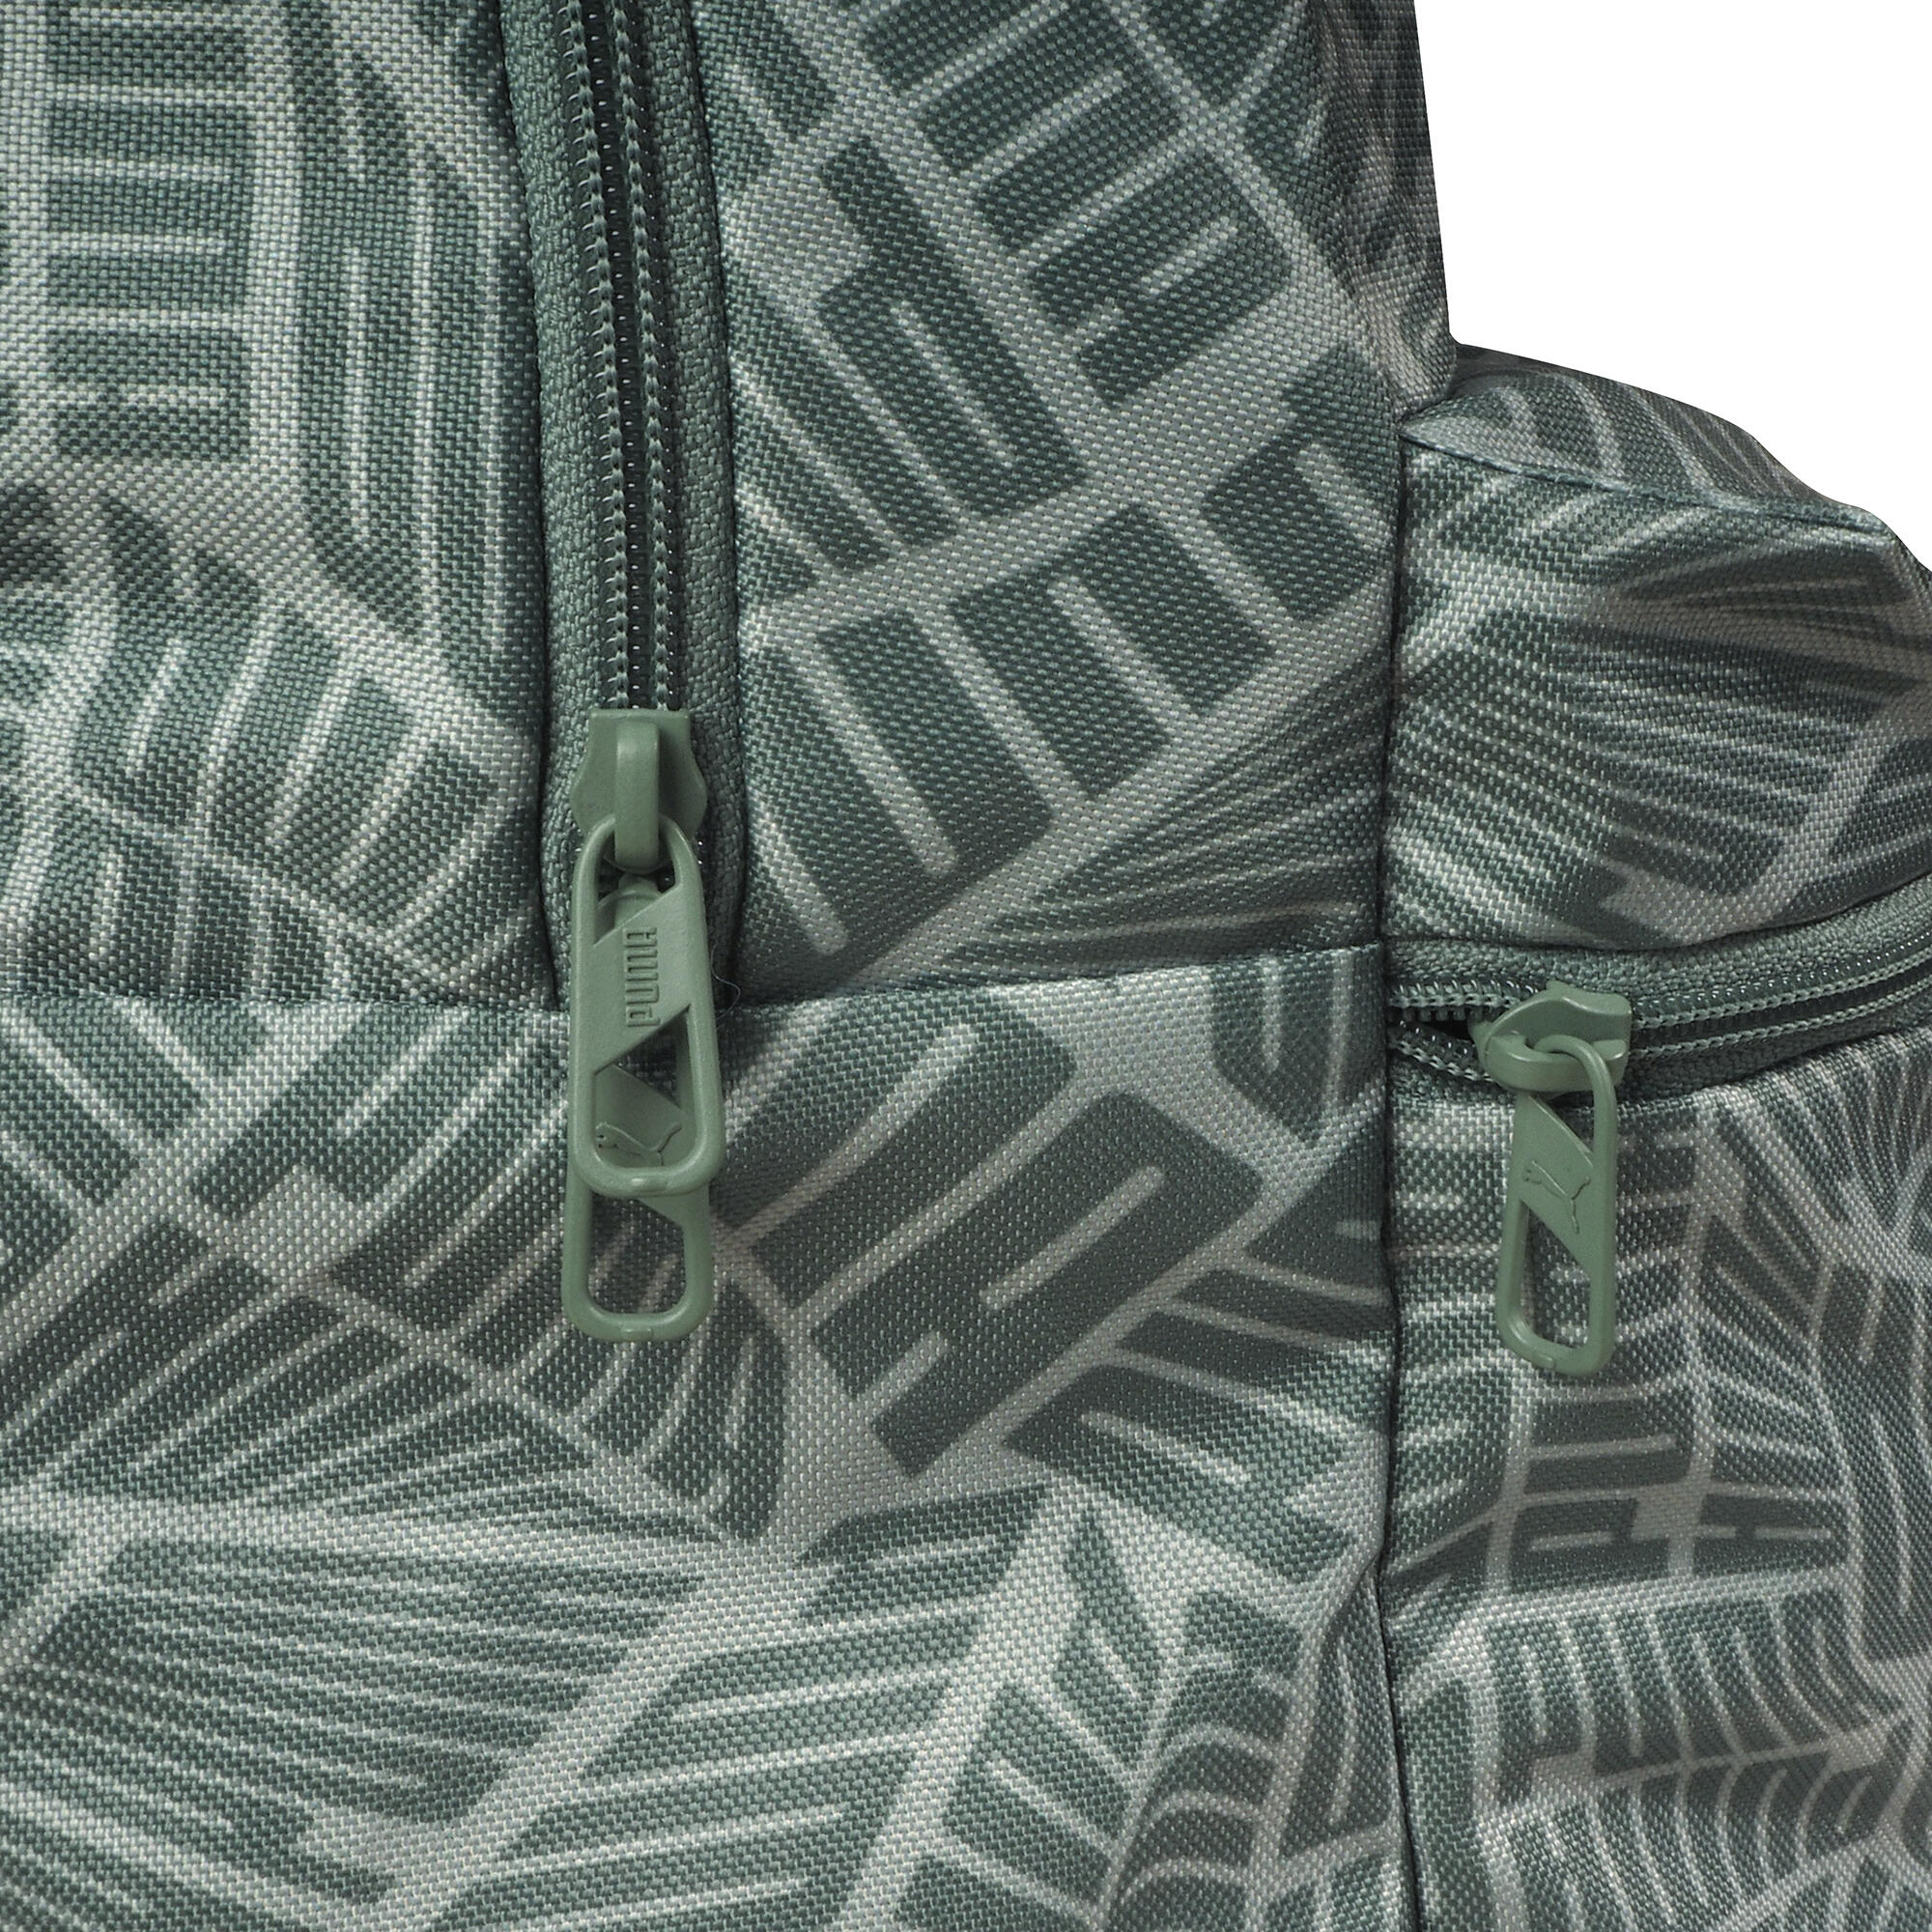 Backpack Phase - Green 5/7